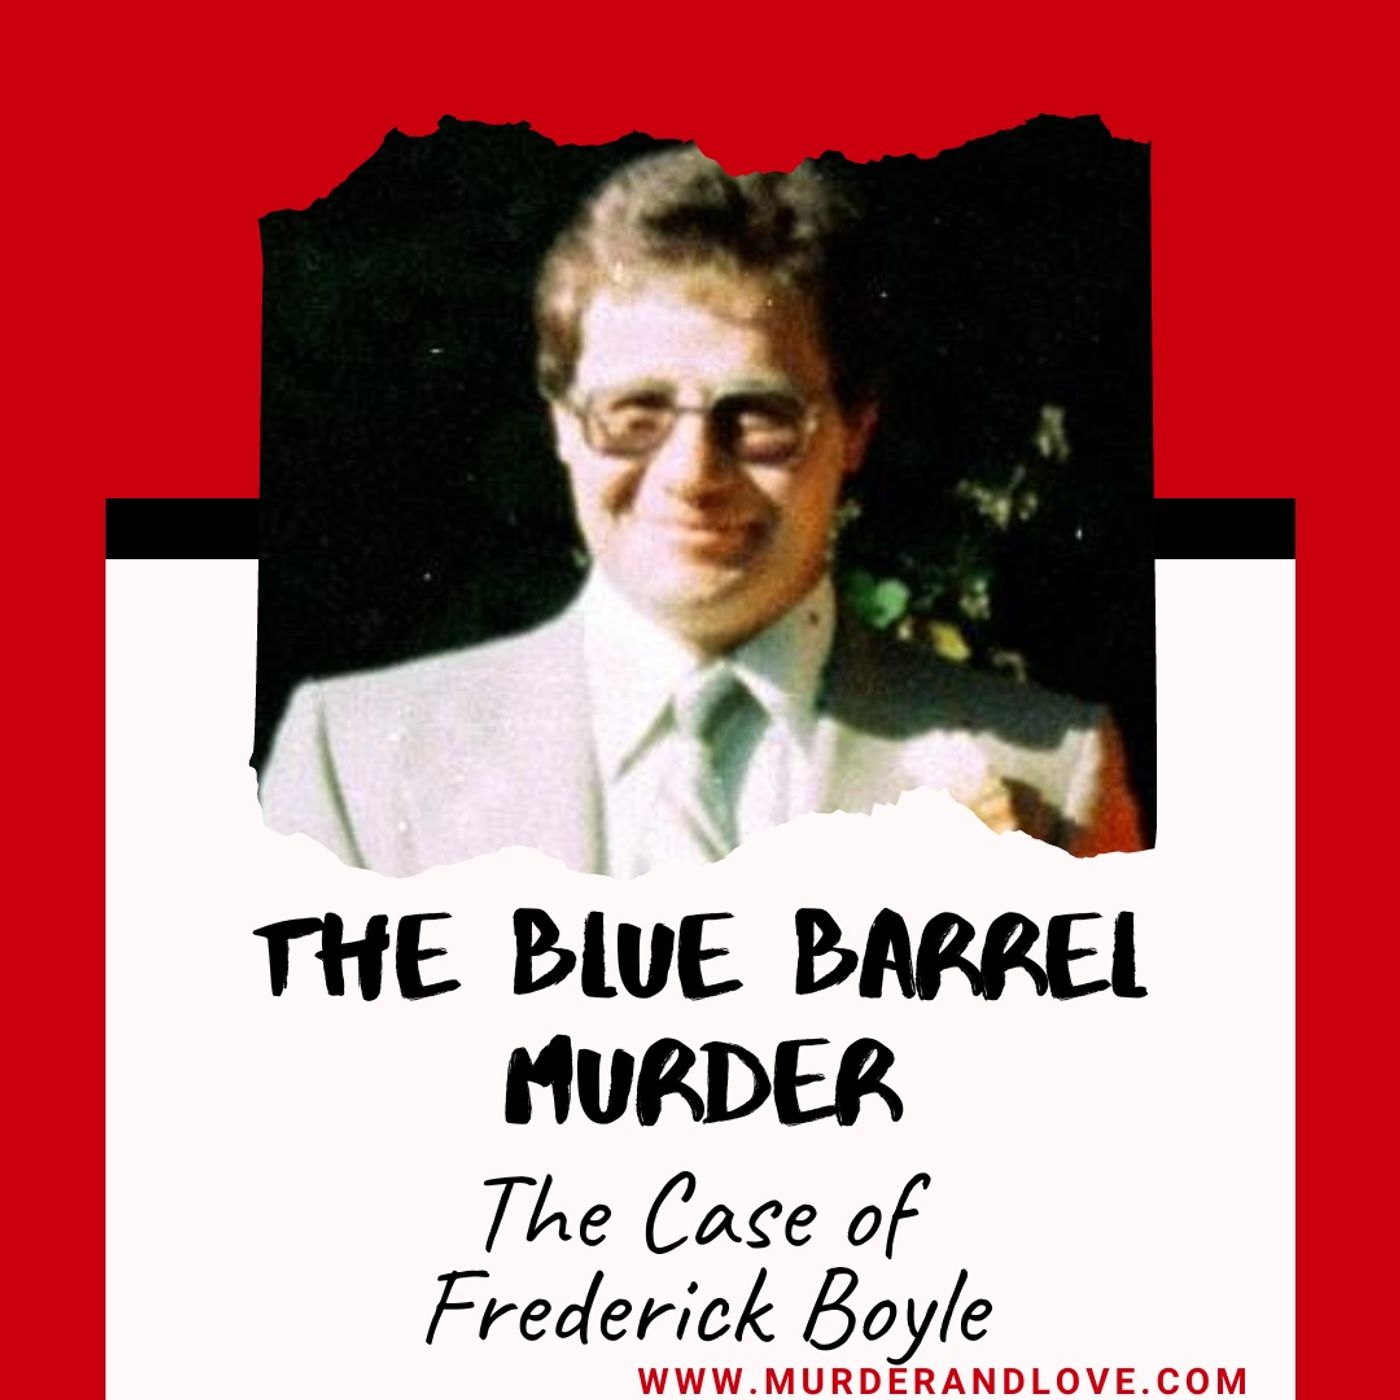 The Case of Fredrick Boyle by Love and Murder